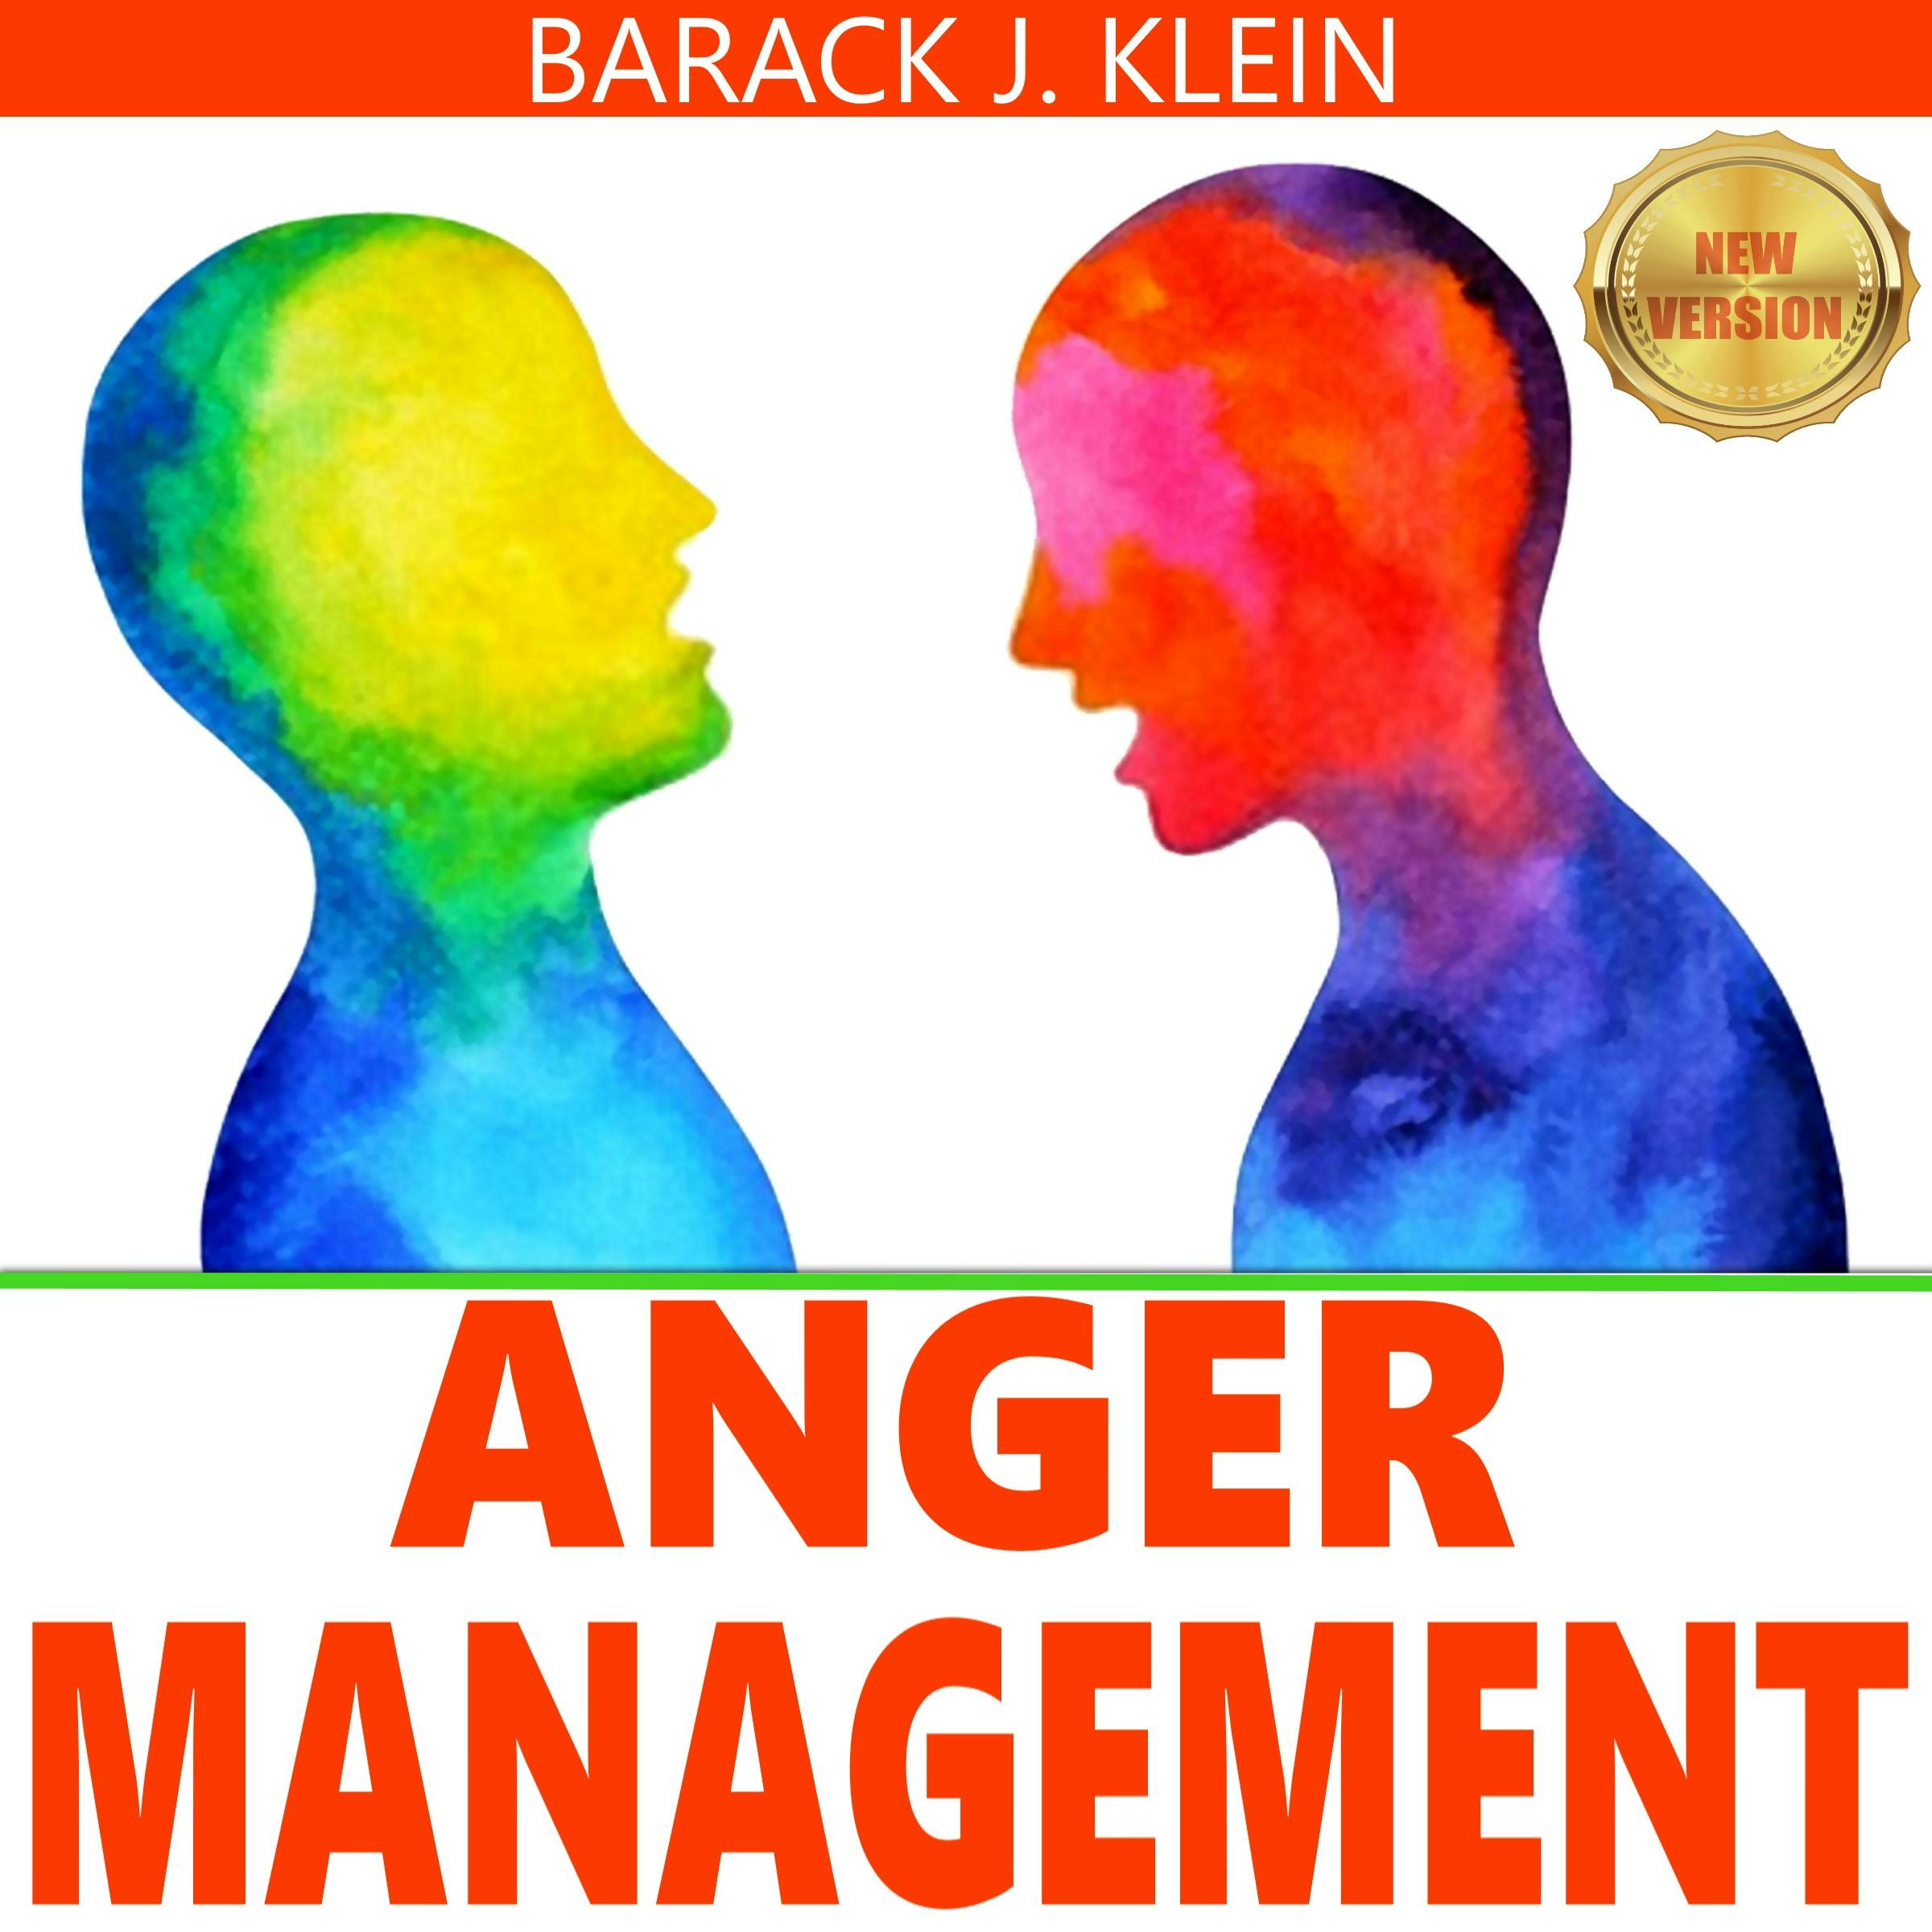 ANGER MANAGEMENT: A Direct Path Through Control of Your Emotions, Learn to Recognize and Control Anger. Overcome Depression & Anxiety. Stress Relief & Take Control of Your Life. NEW VERSION - BARACK J. KLEIN